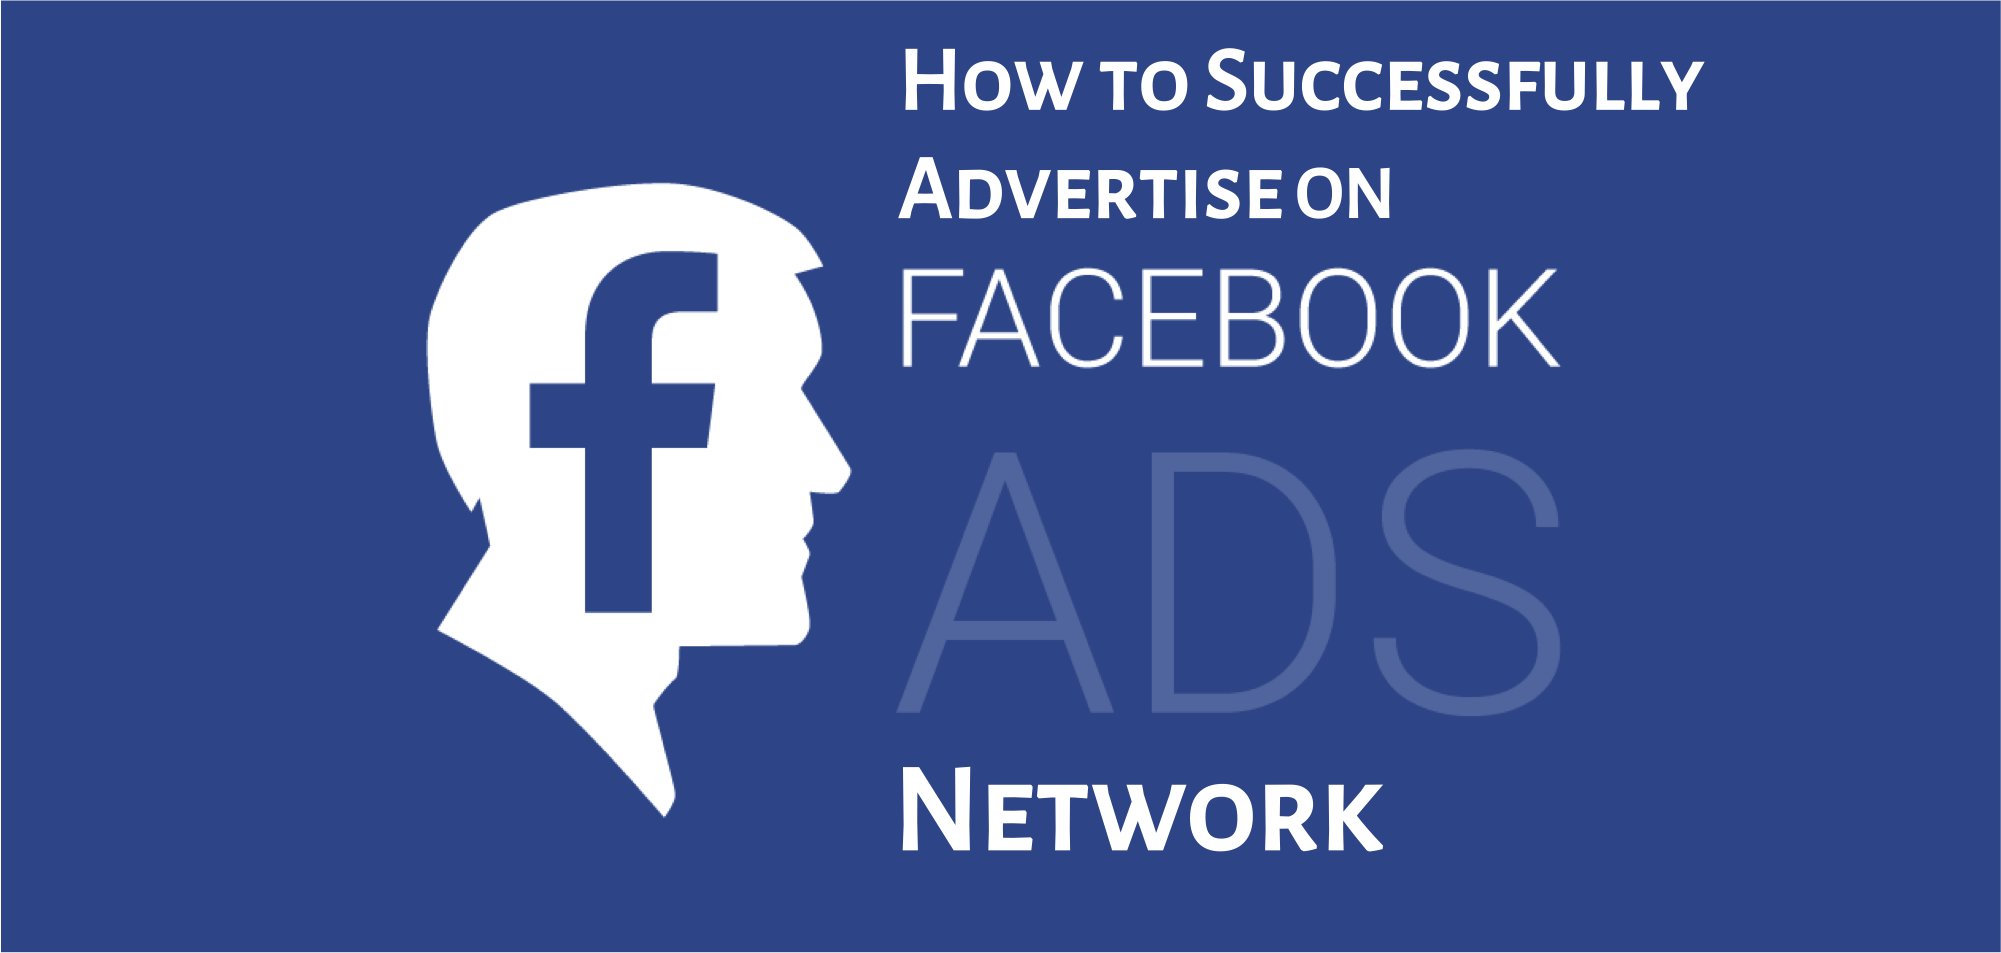 How to Successfully Advertise On Facebook Audience Network